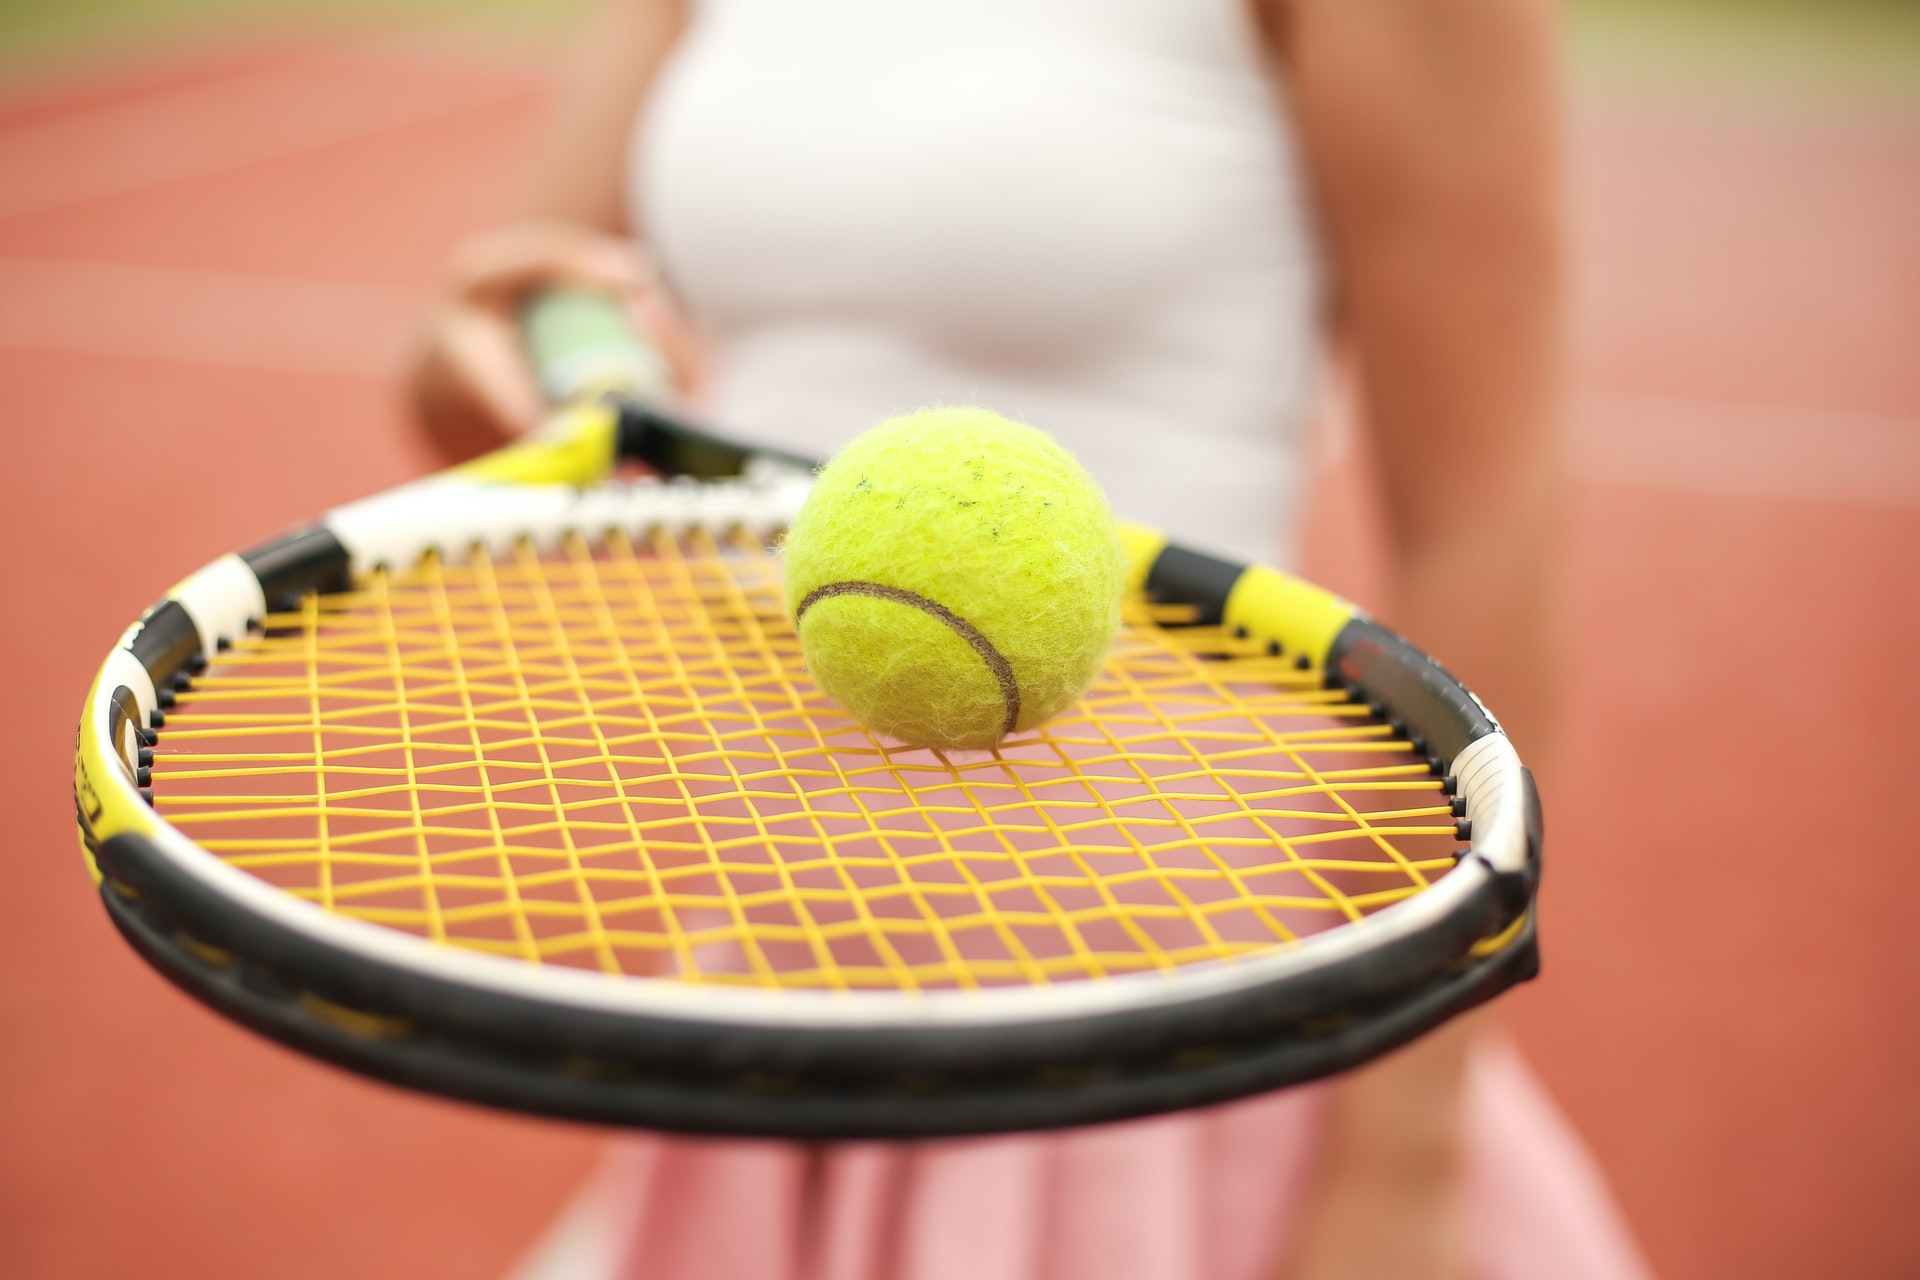 Zoom in of tennis racket with a tennis ball held by a female tennis player in the blurry background